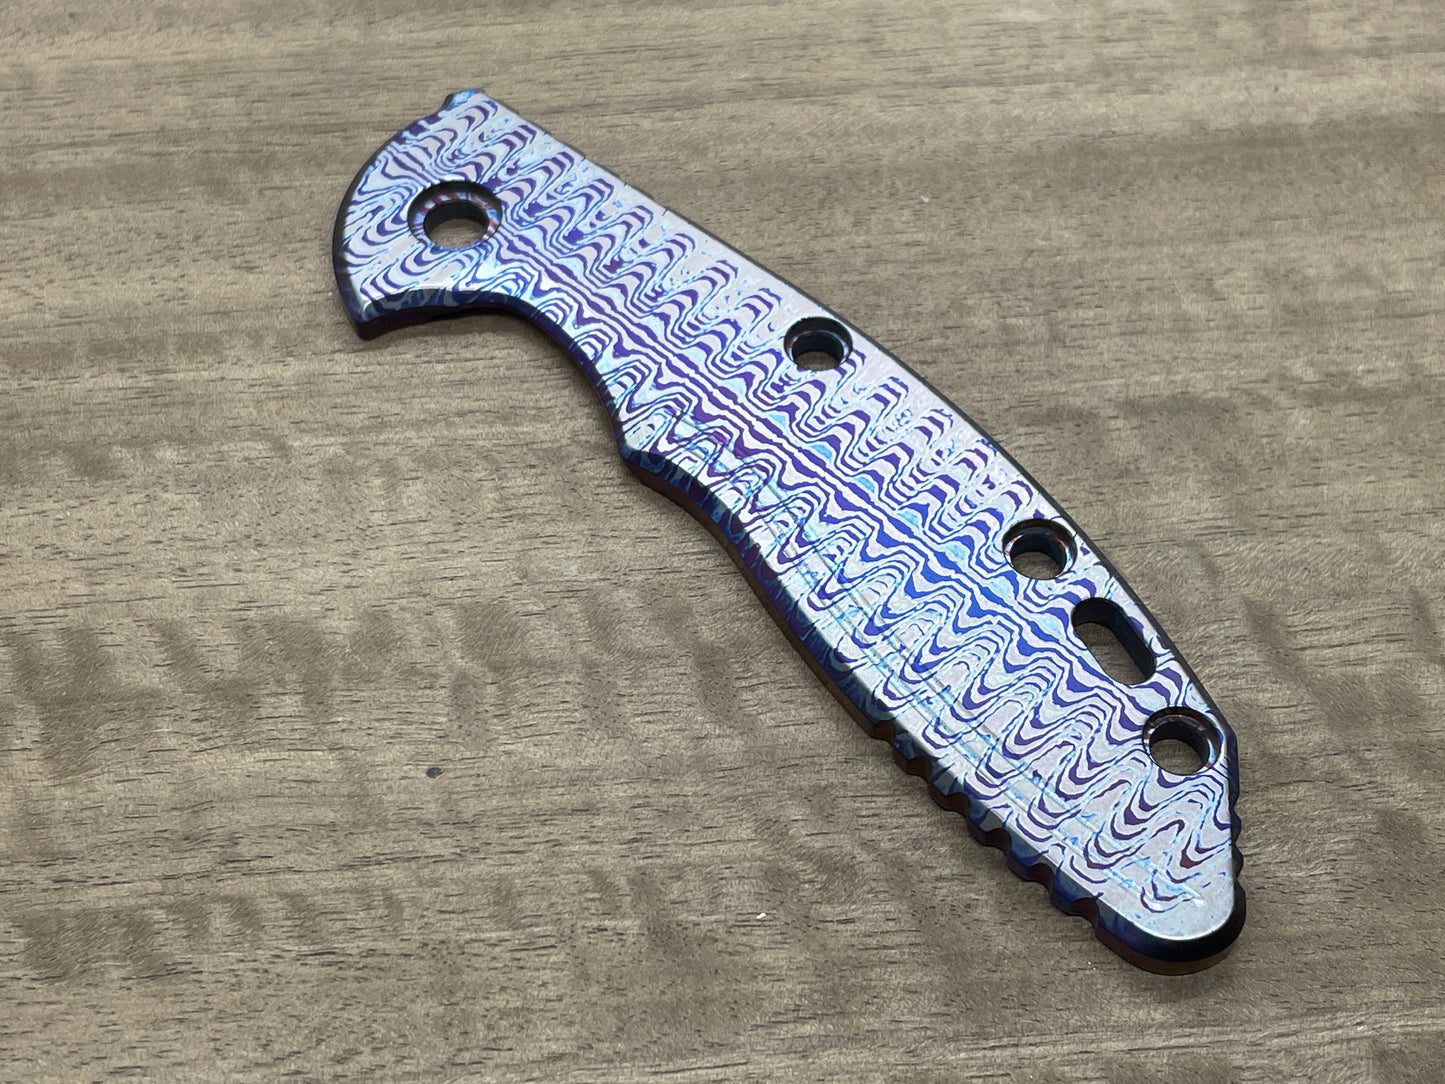 RIPPLE Flamed Titanium scale for XM-18 3.5 HINDERER